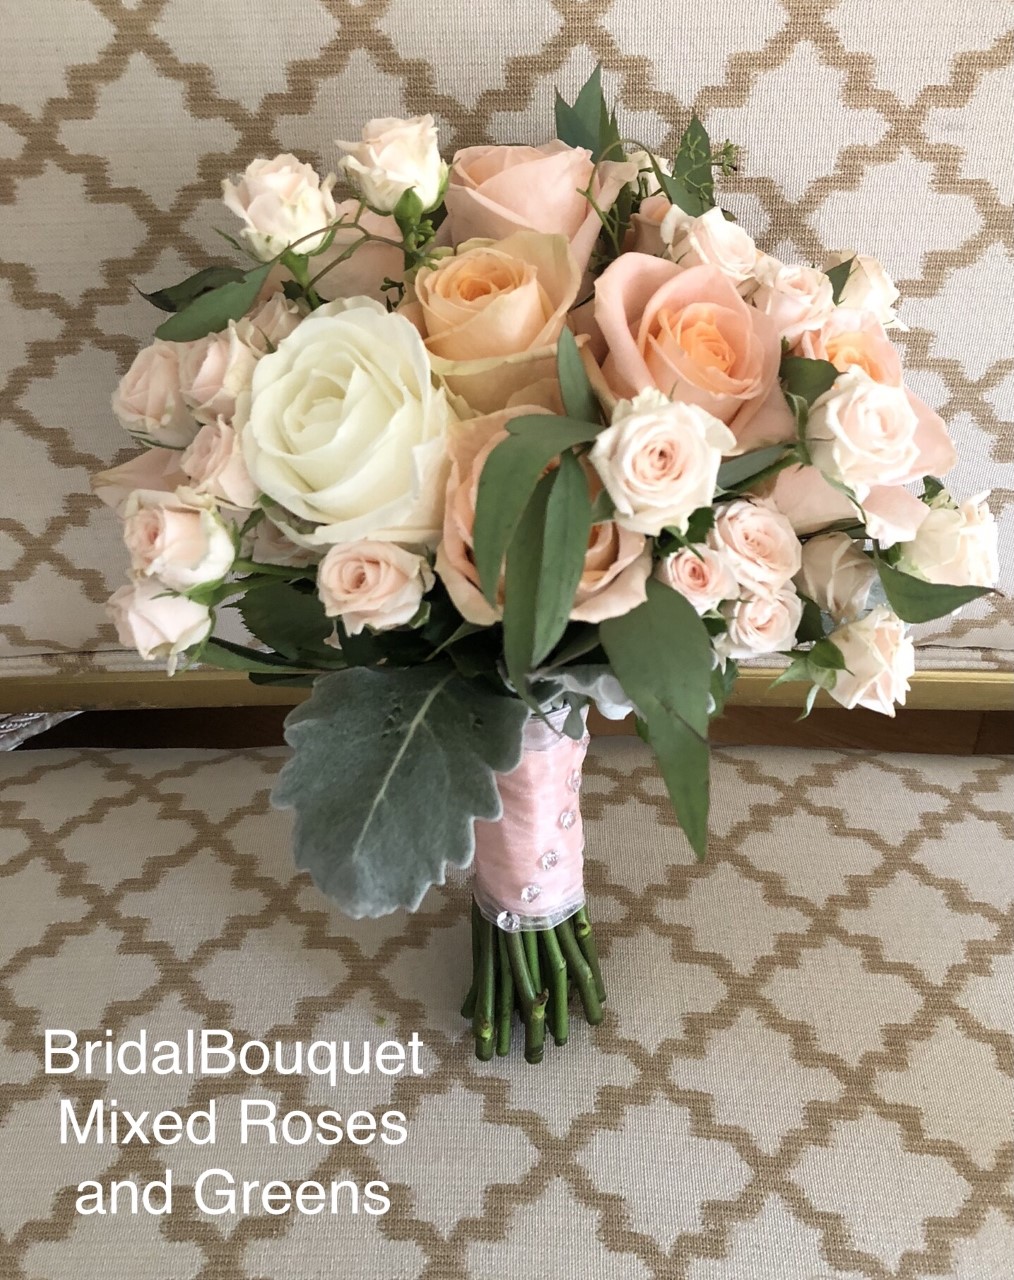 $160 - 2 tone big roses and 1 tone small roses and 2 types of greens Bridal Bouquet 